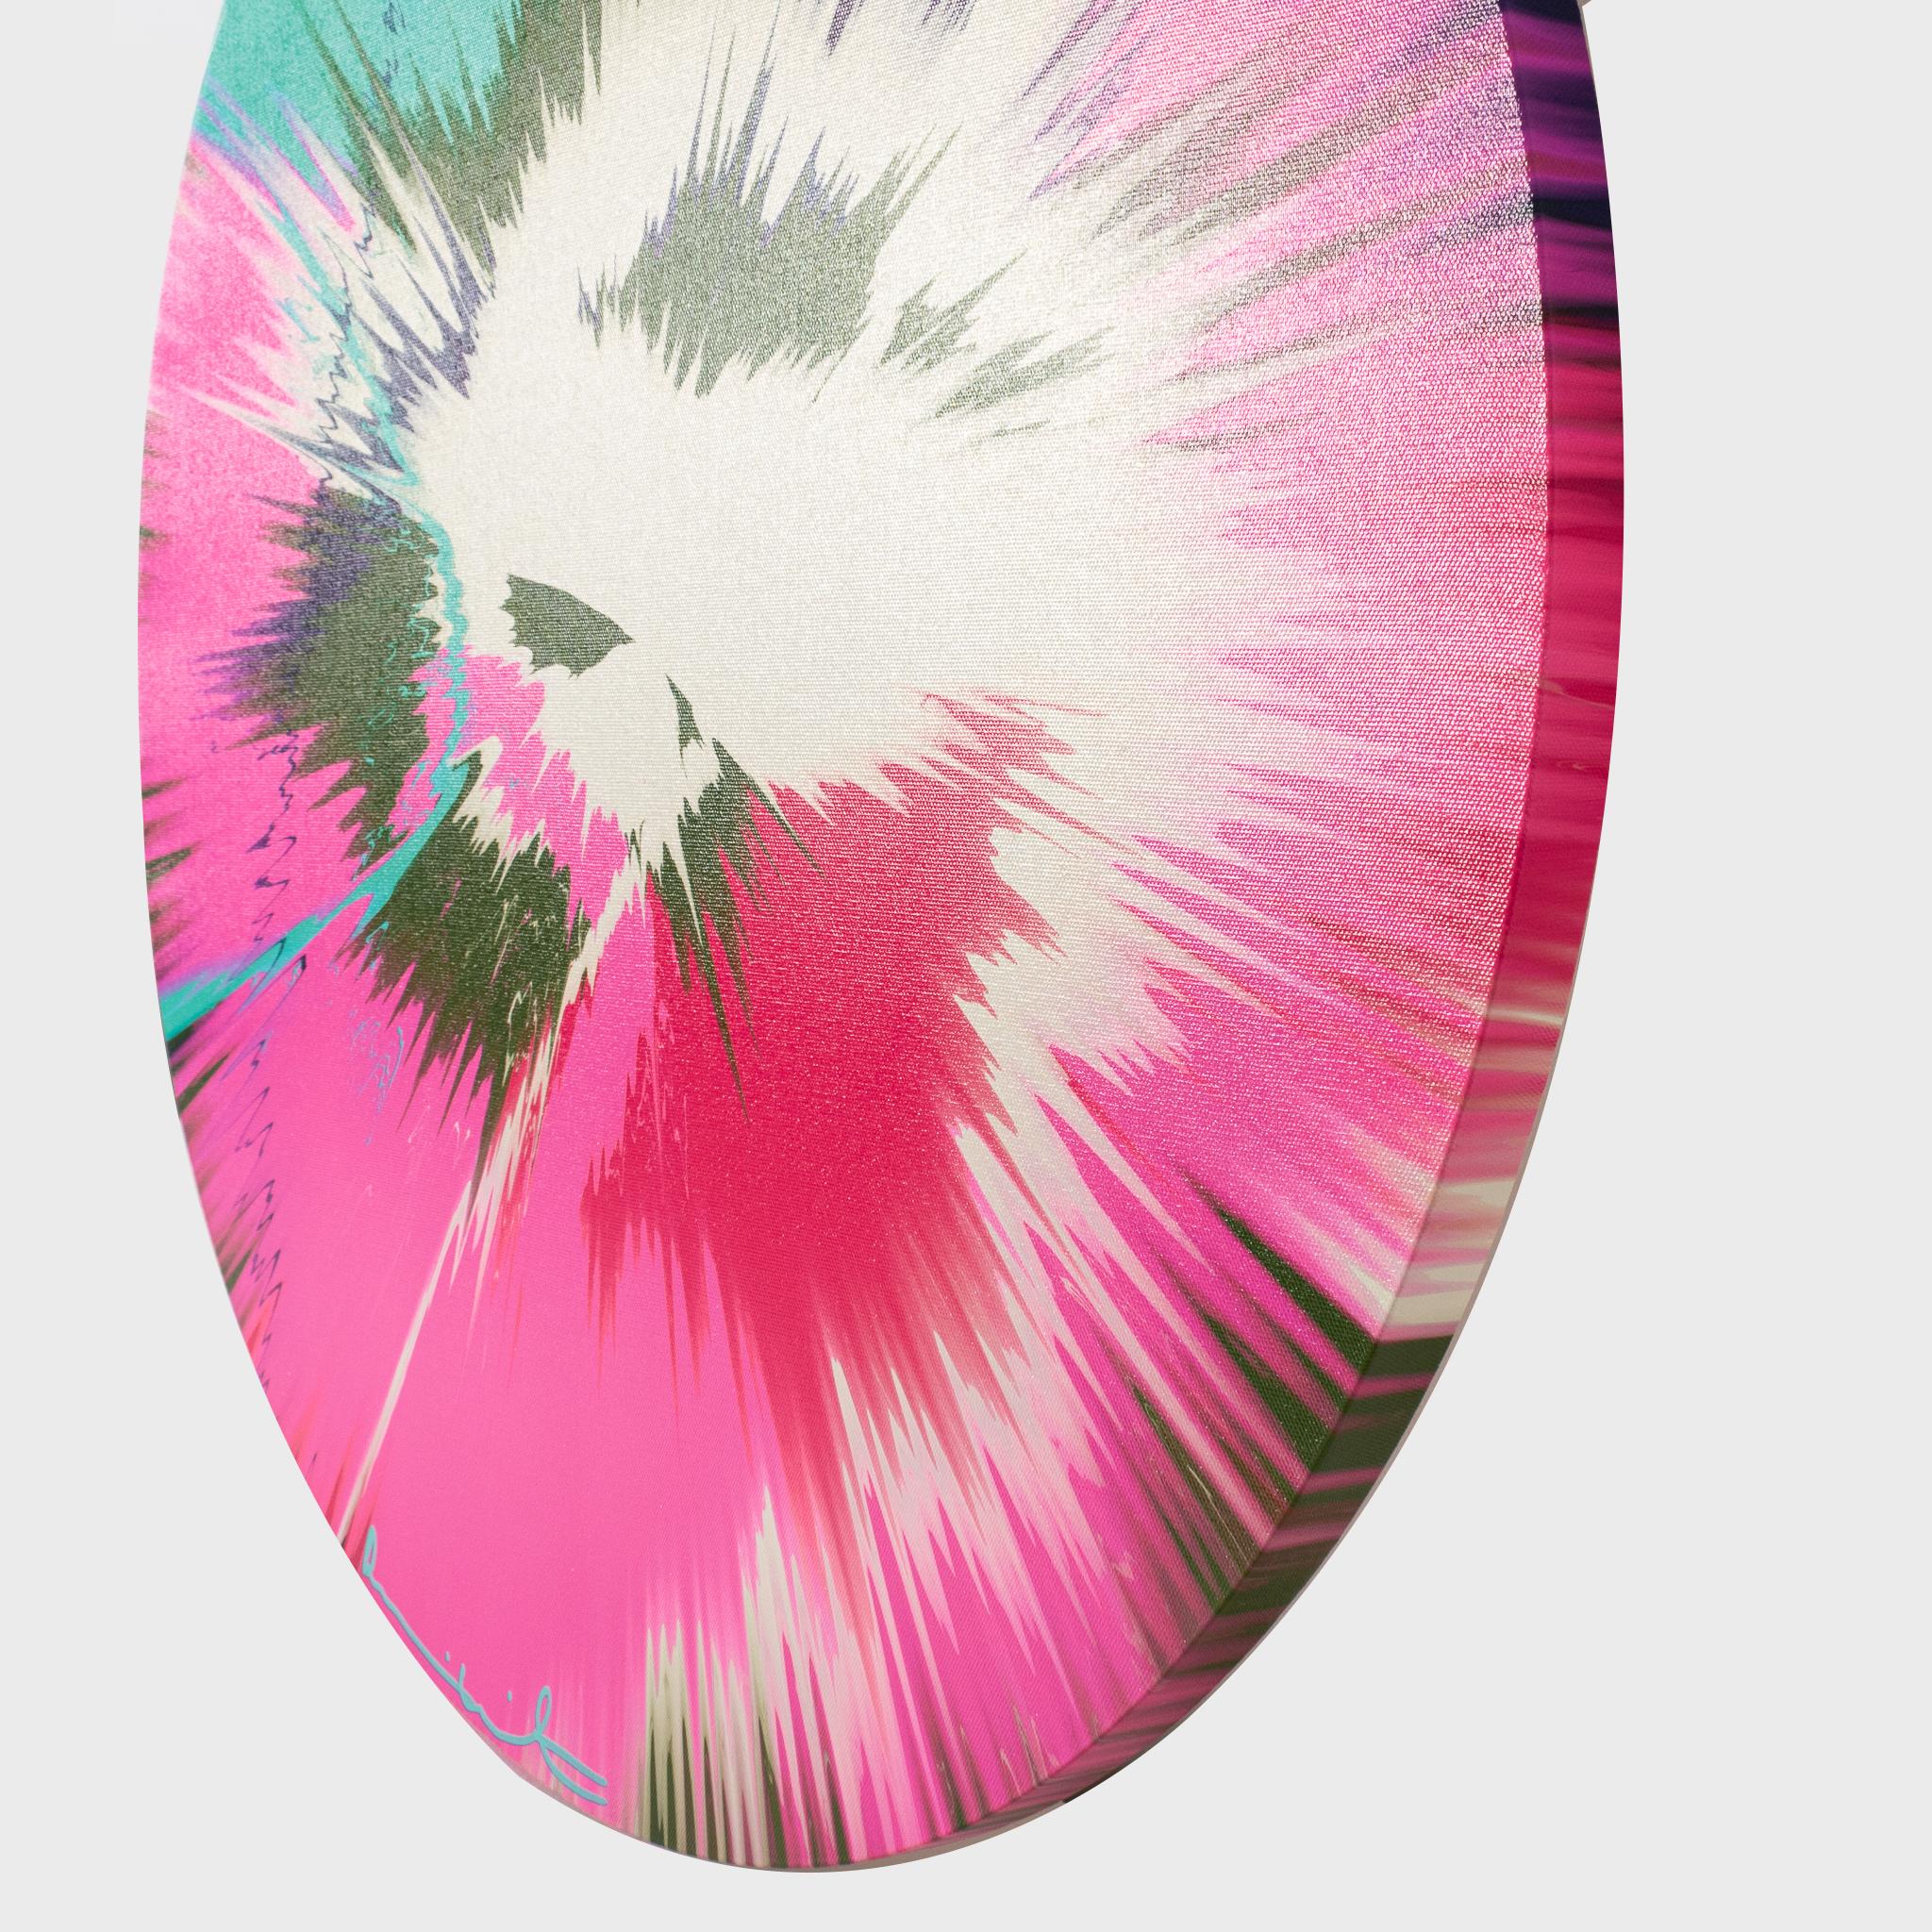 H12-2 Beautiful, Very Gallant But Heart-Soothing, Brave And Selfless Comet Paint - Print by Damien Hirst